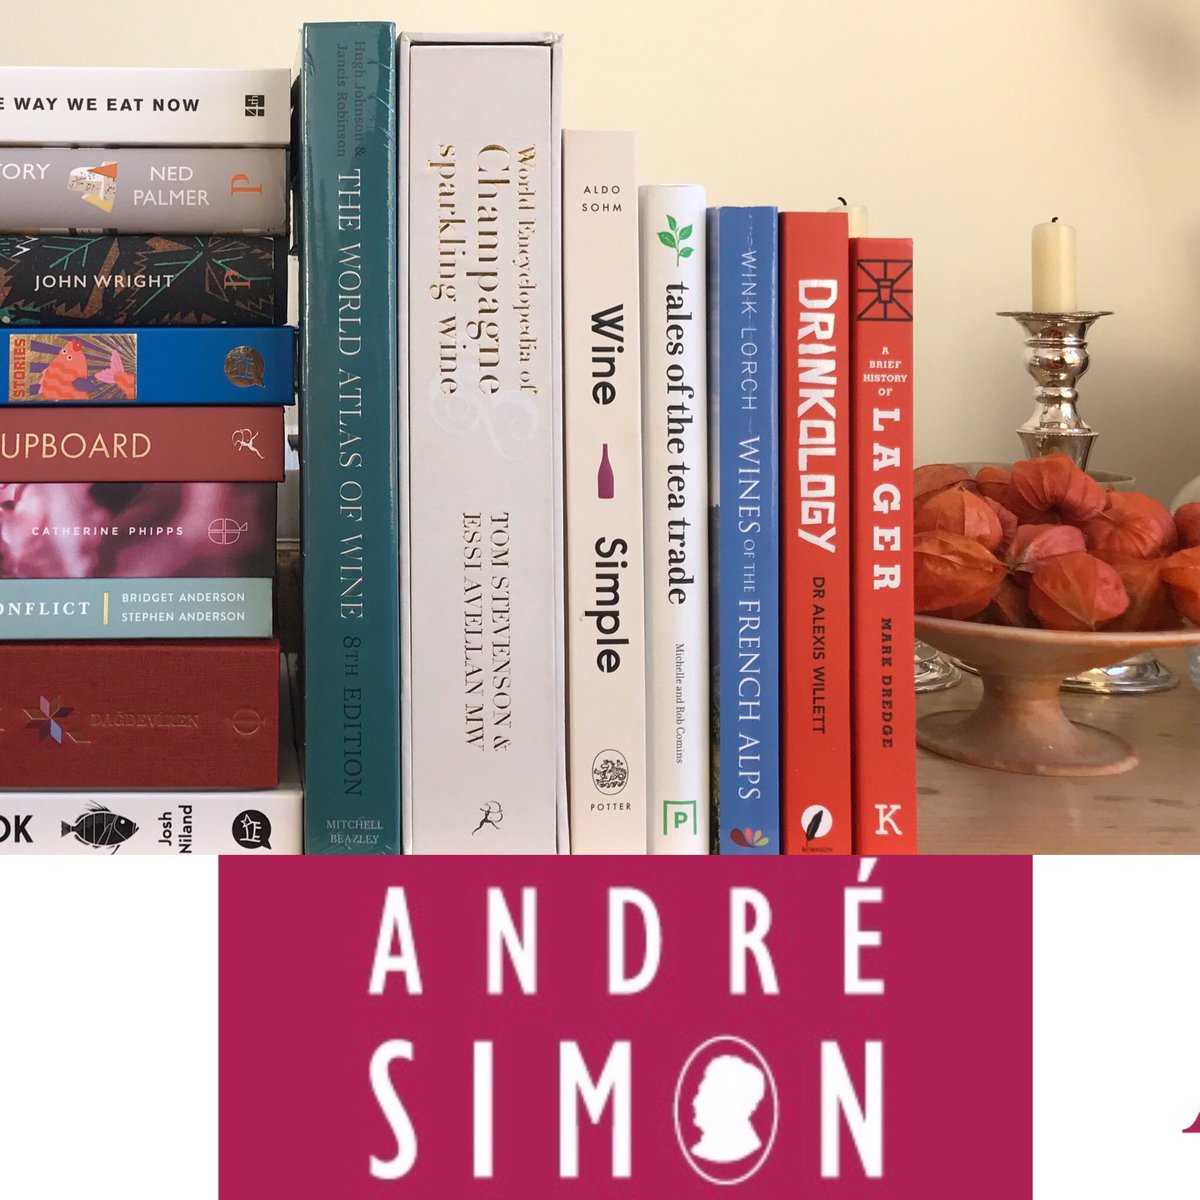 So happy and honoured that our Christie’s World Encyclopedia of Champagne and Sparkling Wine was shortlisted for the prestigious Andre Simon Awards 🙏❤️! It was selected out of 150 food and wine books - we’ll know the winners in January 🤞!  @mrtomfizz #winebook @AndreSimonAward